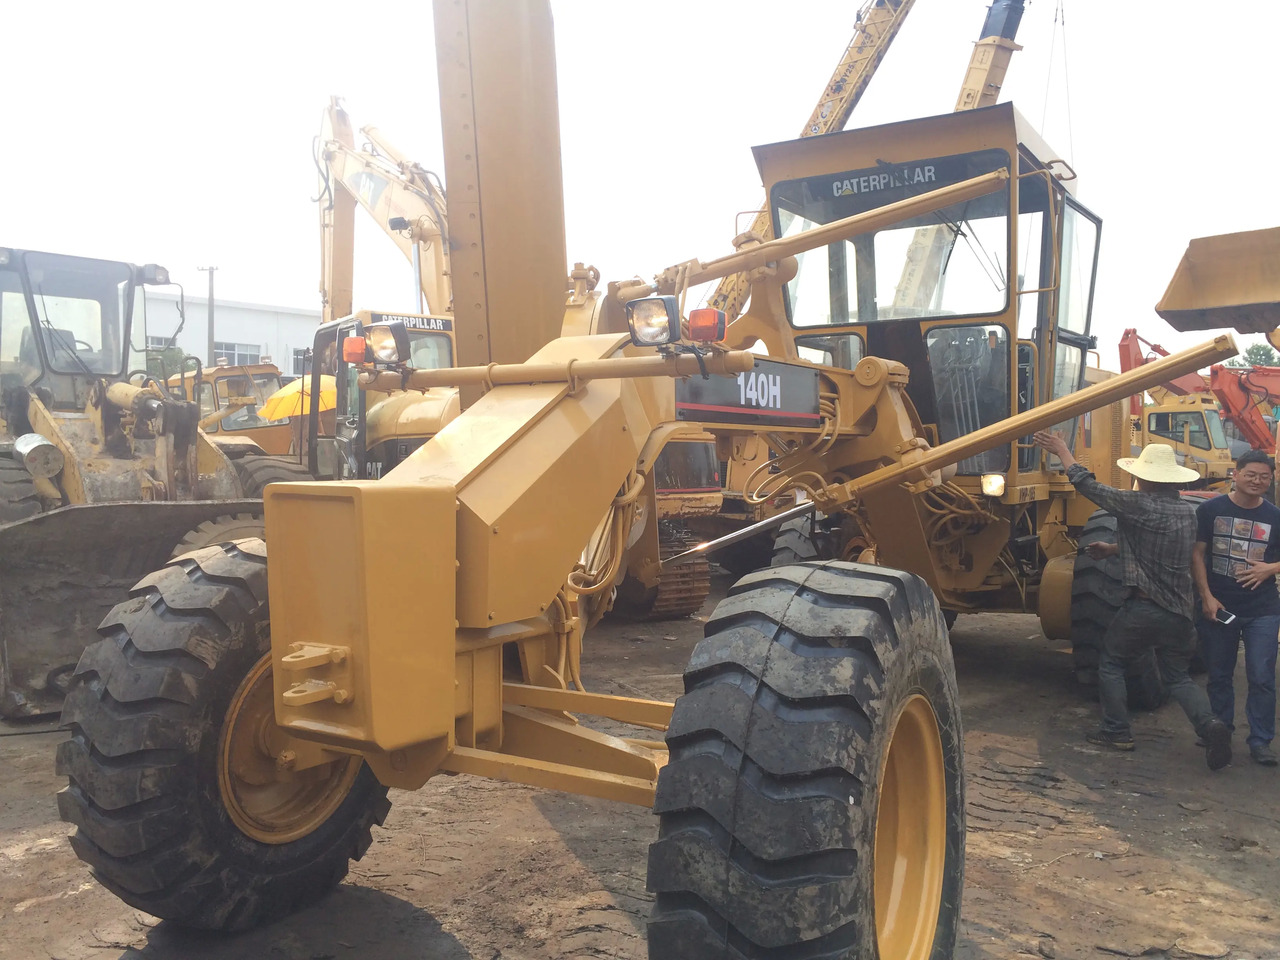 Niveleuse Hot sale Used Cat 140H motor grader with good condition,USED heavy equipment used motor grader CAT 140H grader in China: photos 2